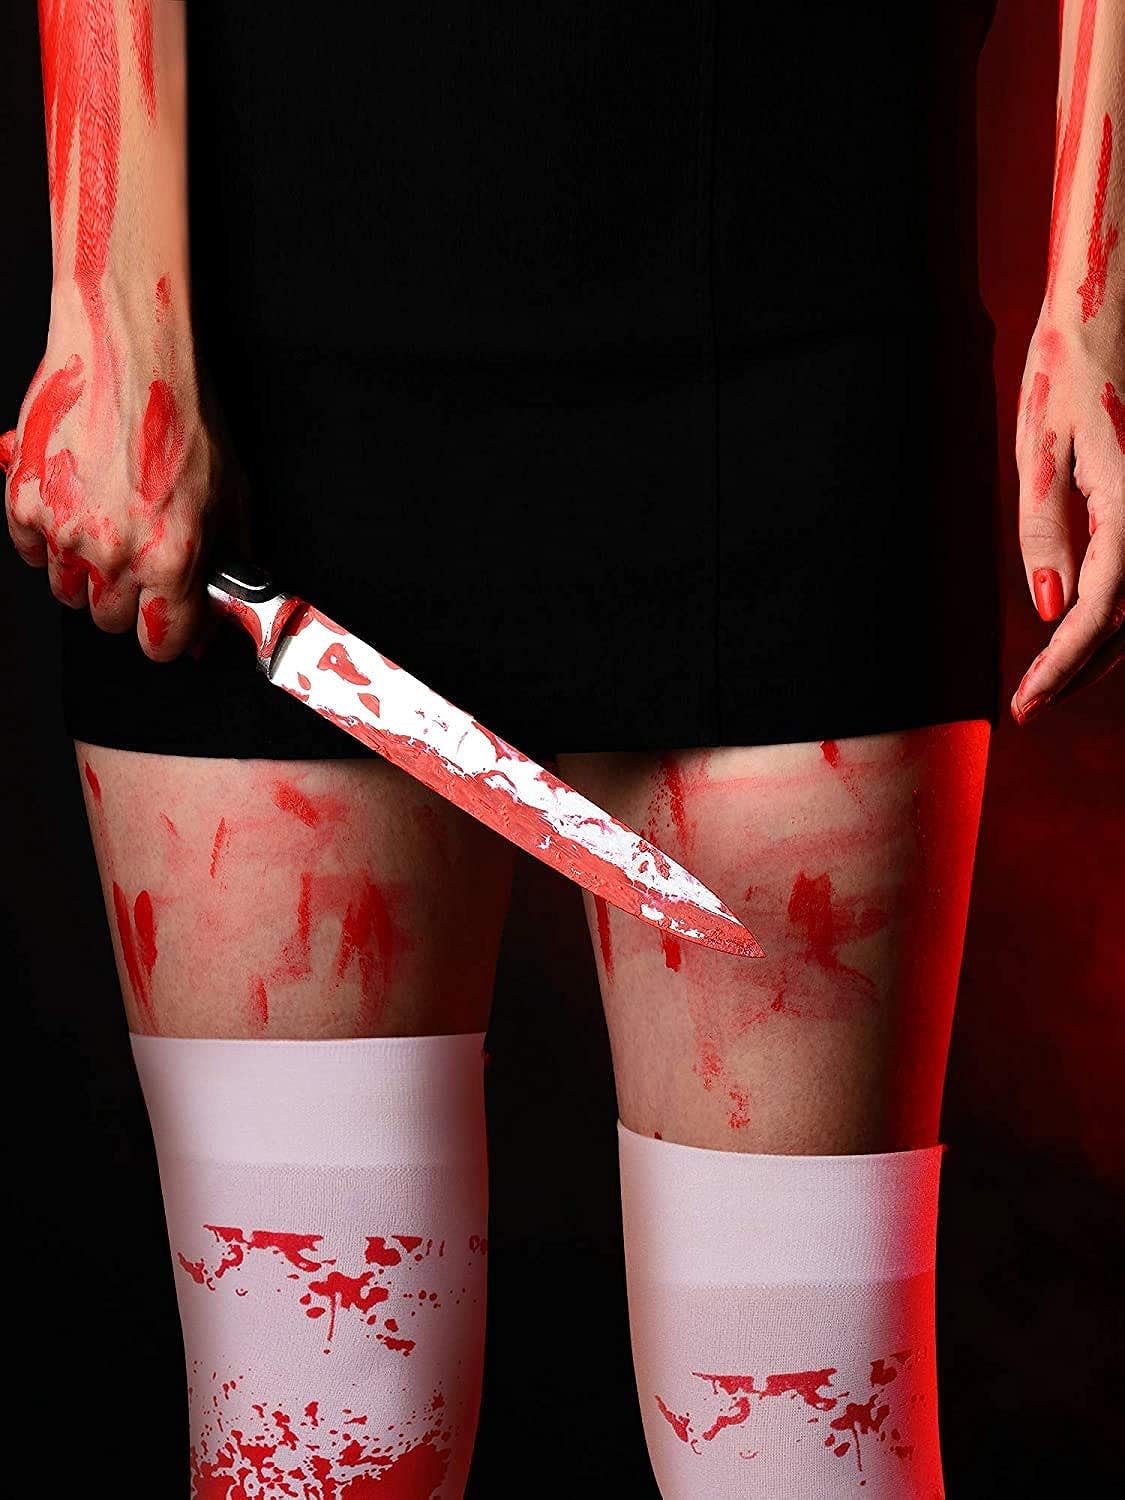 Scary Blood-Stained Halloween Stockings - Over Knee Zombie Festival Socks